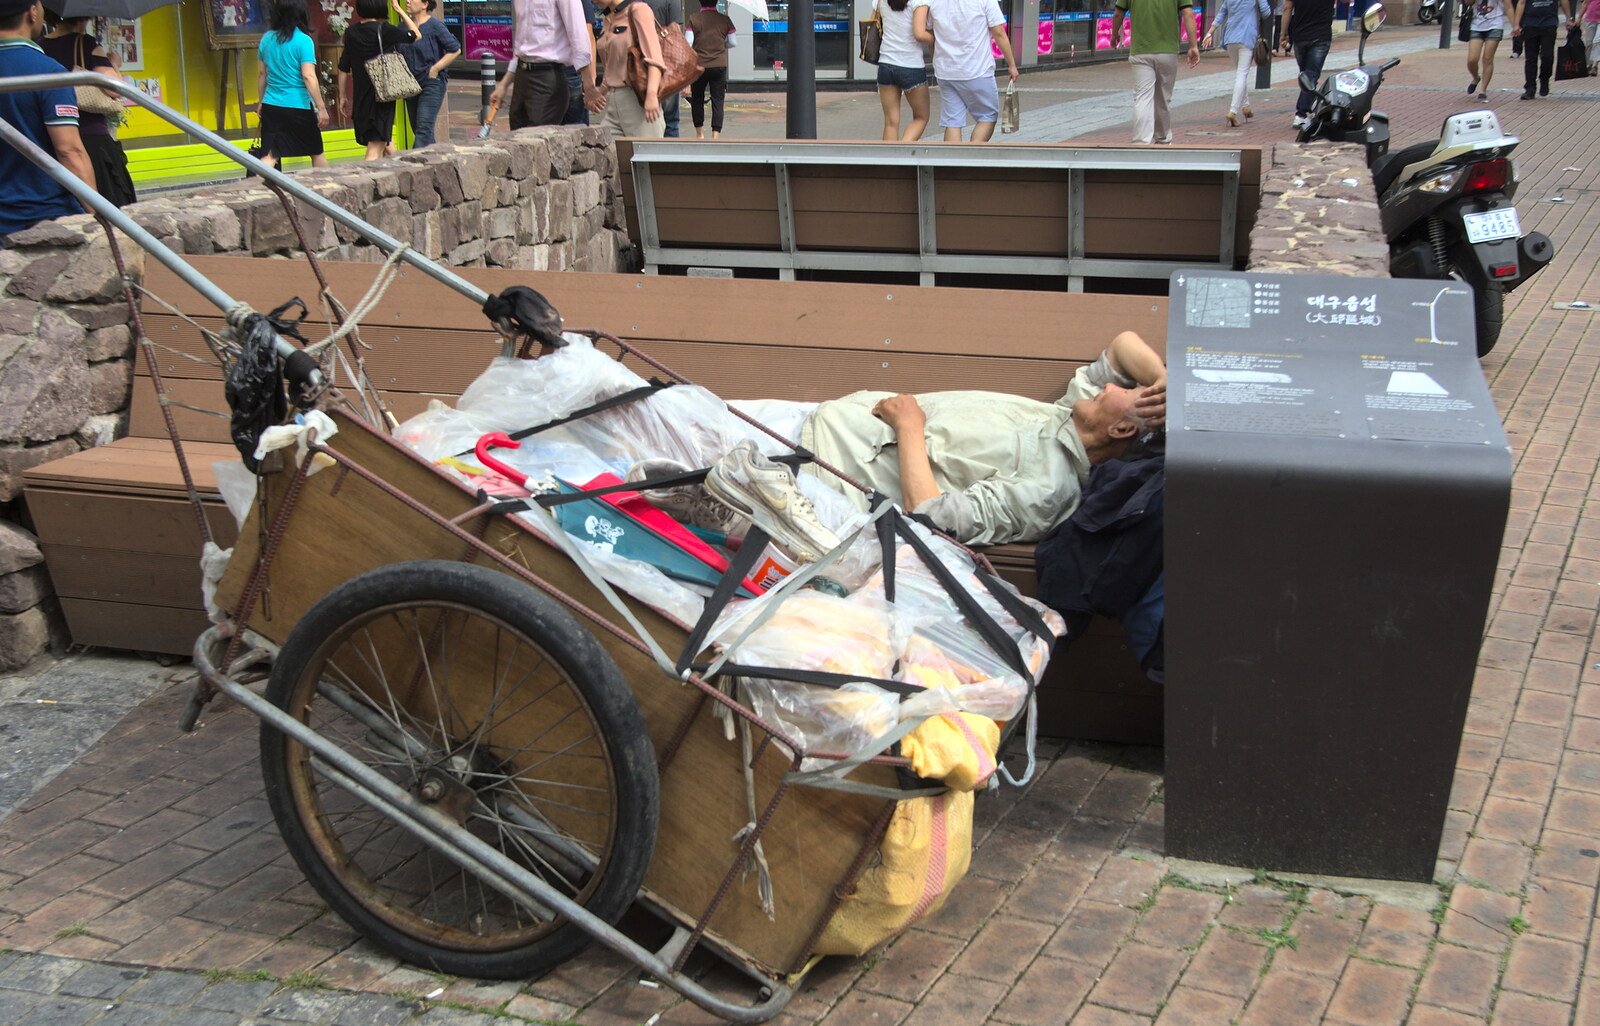 A sleeping homeless dude with his world in a cart from Seomun Market, Daegu, South Korea - 1st July 2012